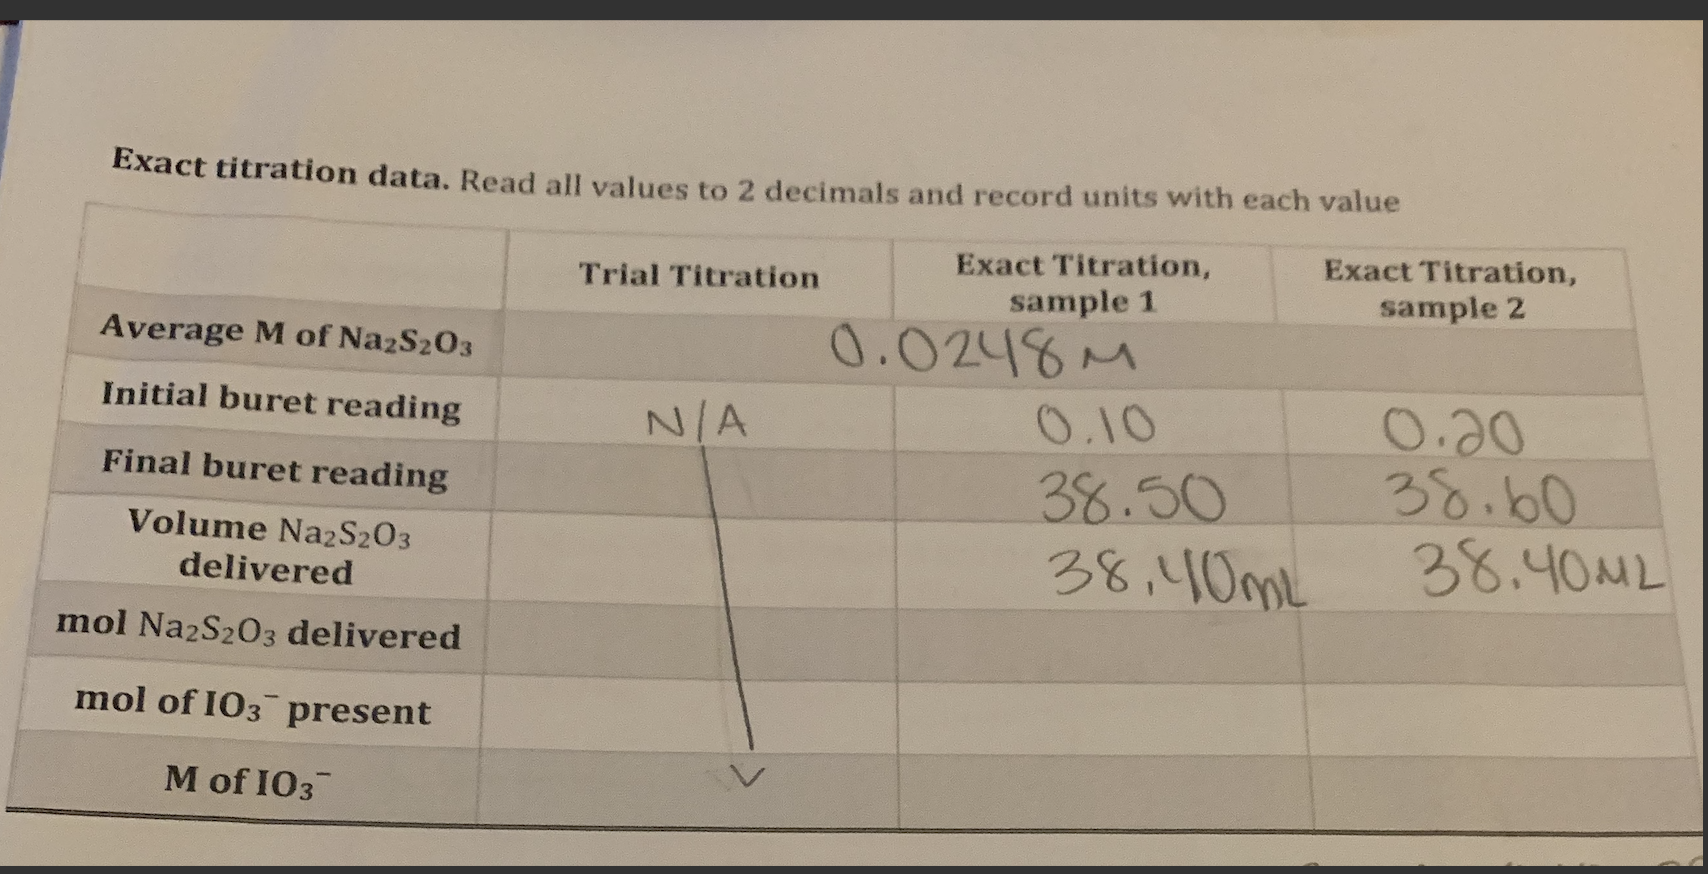 Exact titration data. Read all values to 2 decimals and record units with each value
Exact Titration,
Exact Titration,
Trial Titration
sample 1
sample 2
Average M of NazS203
0.0248M
0.20
38.60
38.40ML
Initial buret reading
N/A
0.10
Final buret reading
38.50
Volume Na2S203
38,40ML
delivered
mol Na2S203 delivered
mol of IO3 present
M of IO3
